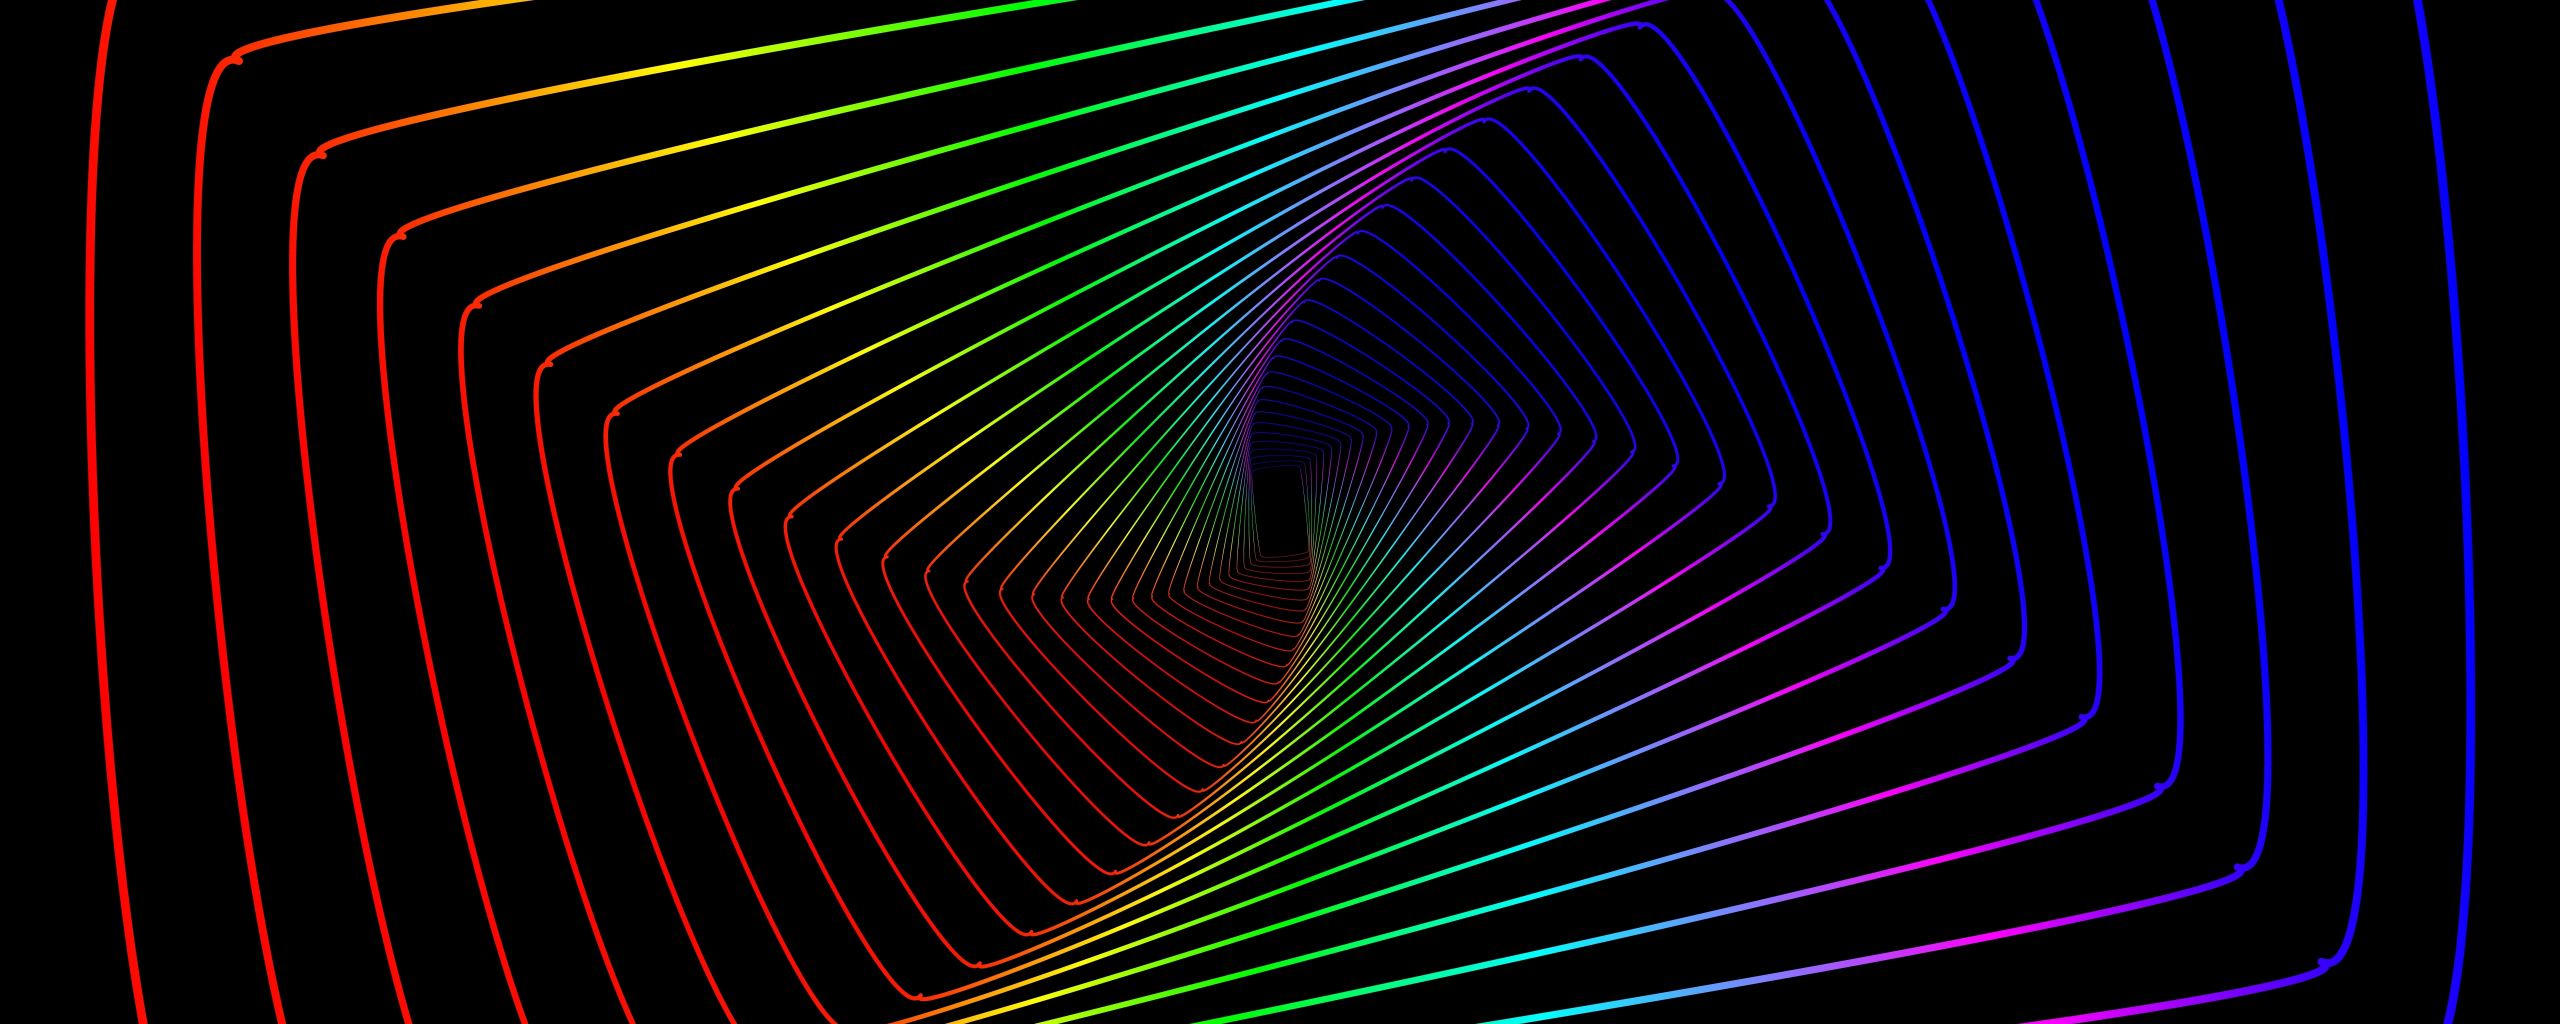 Colorful lines, swirl, abstract, minimal, 2560x1024 wallpaper